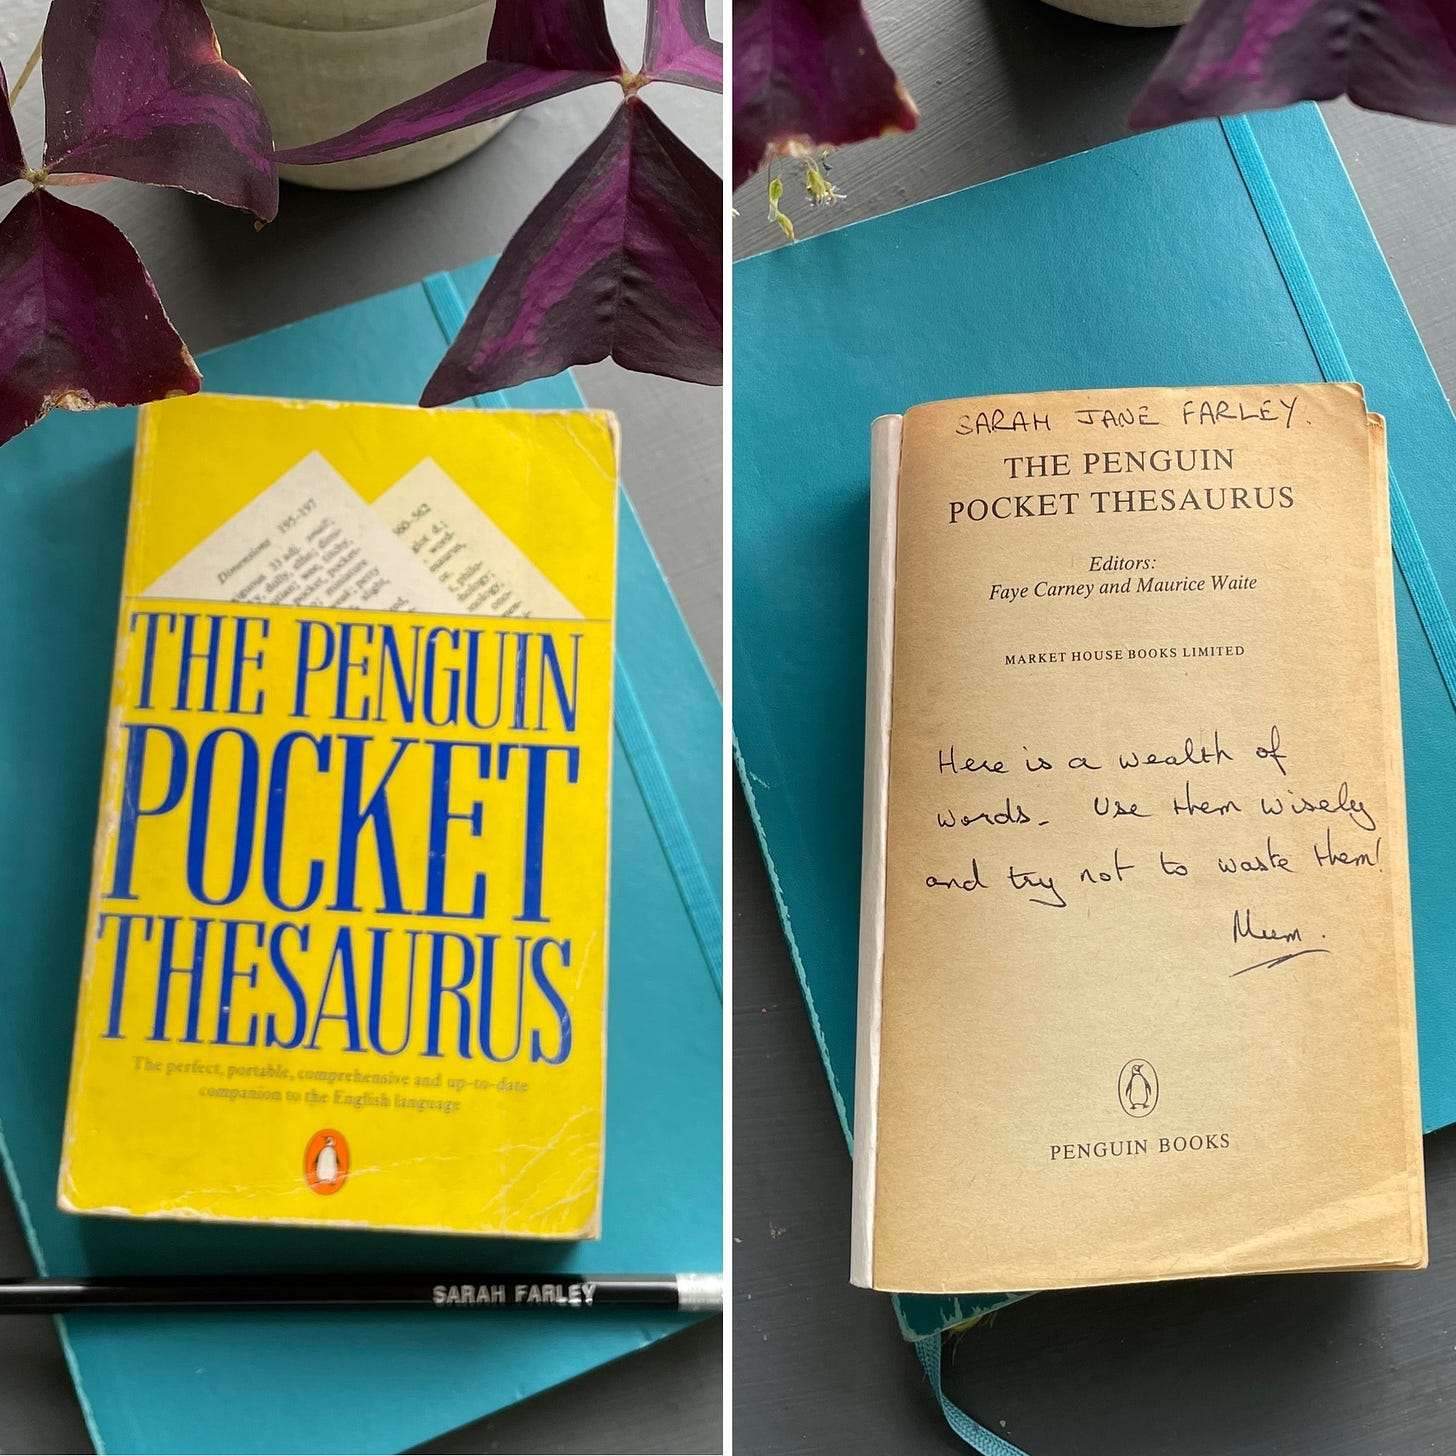 Two images: the yellow front cover of The Penguin Pocket Thesaurus and the inside page with a dedication 'Here is a wealth of words. Use them wisely and try not to waste them!